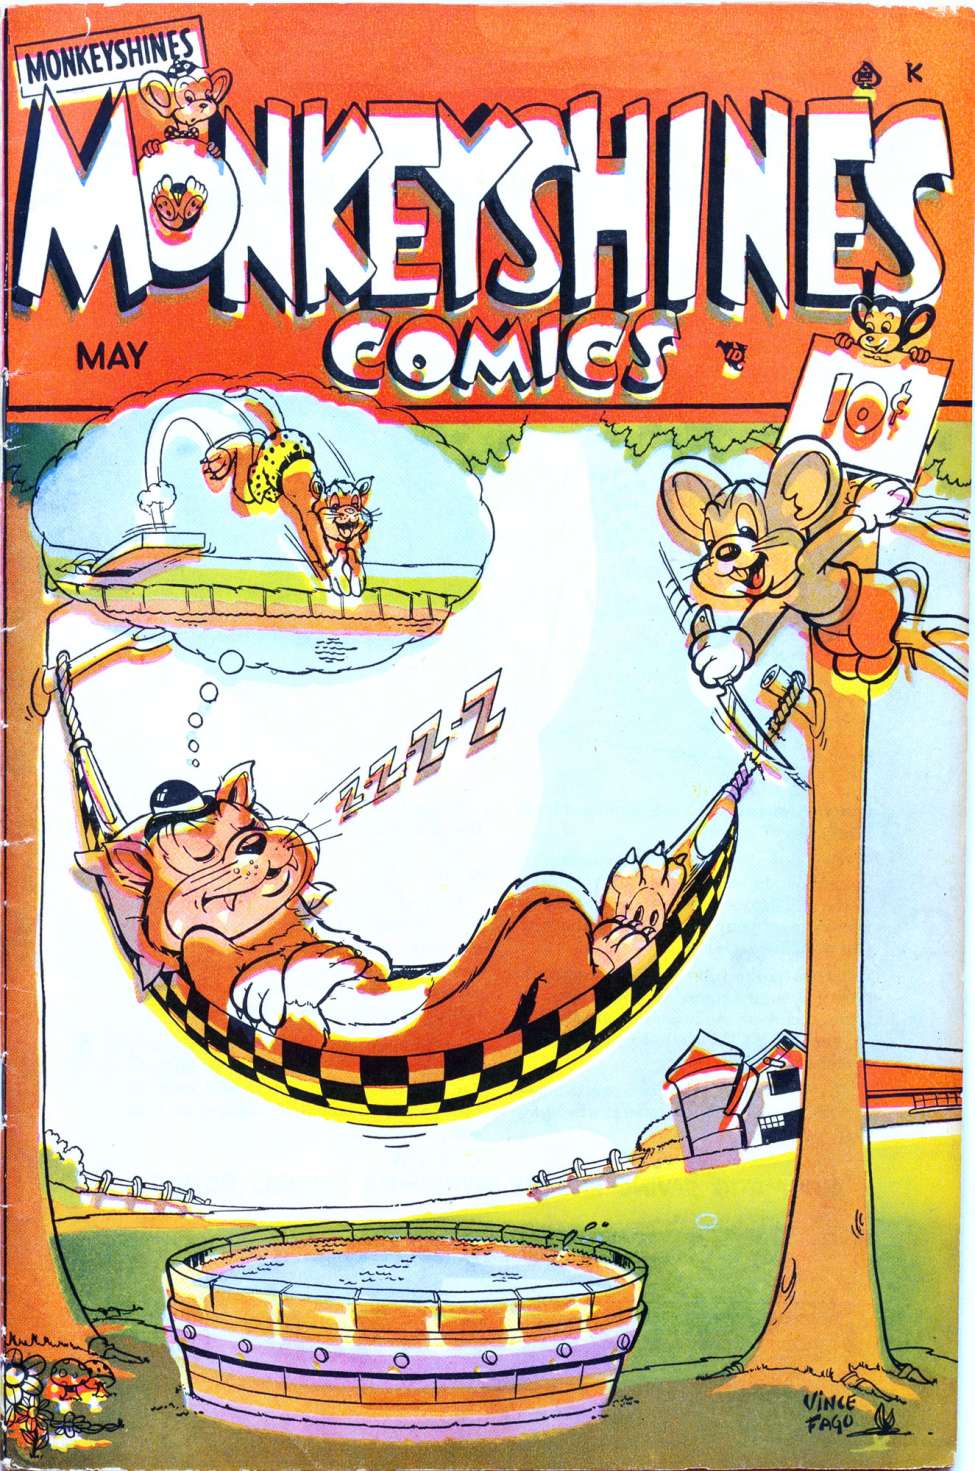 Book Cover For Monkeyshines Comics 26